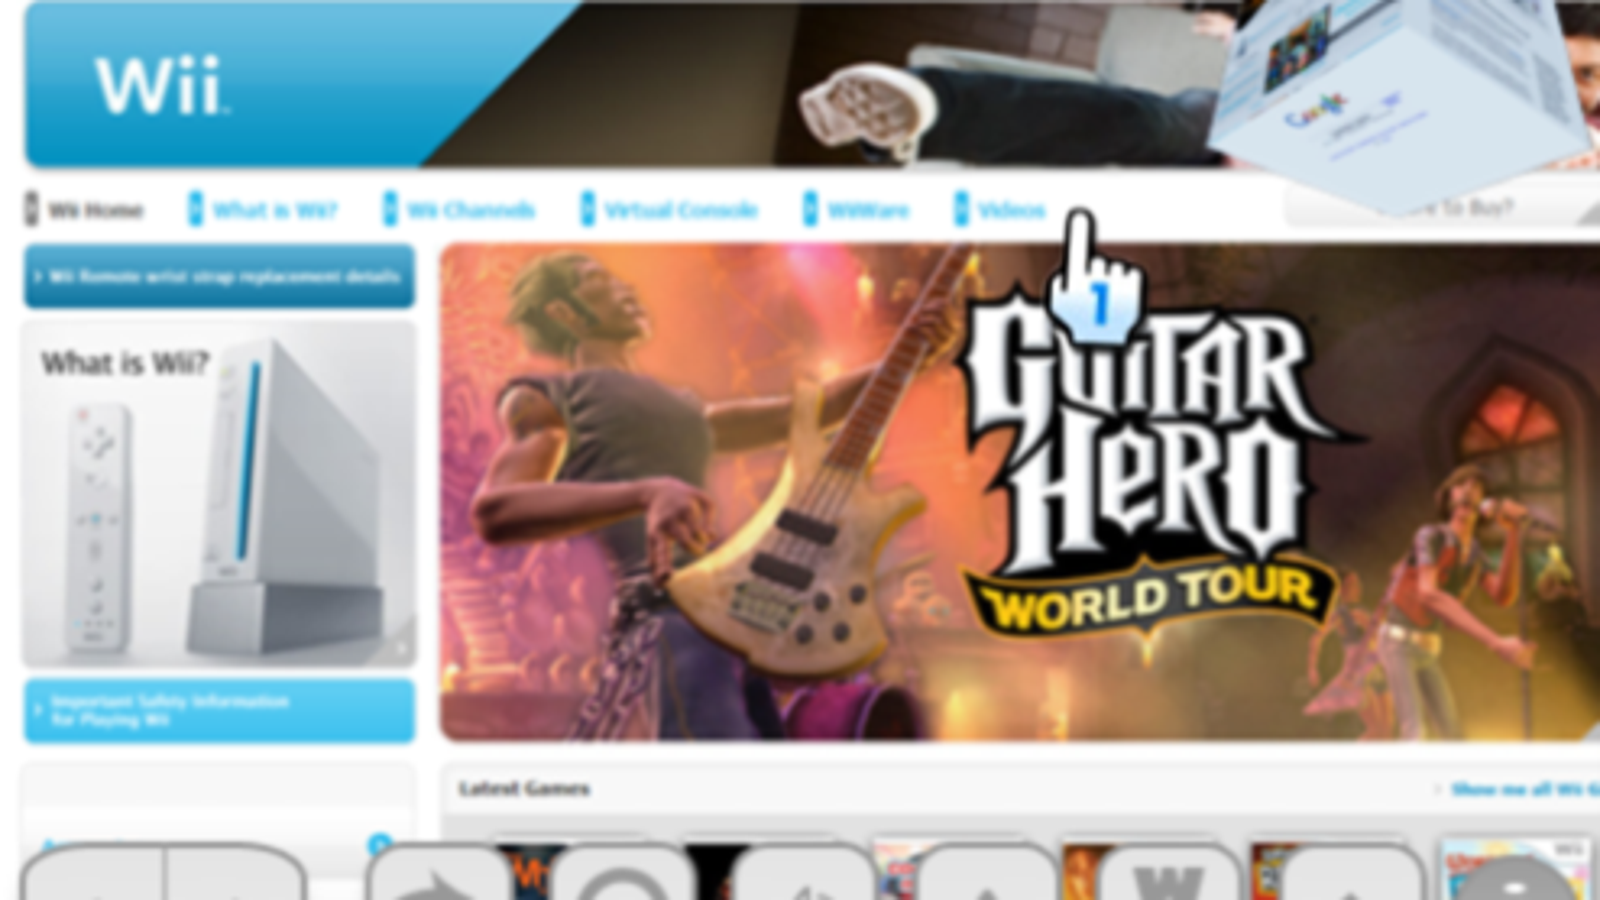 wii opera browser download free